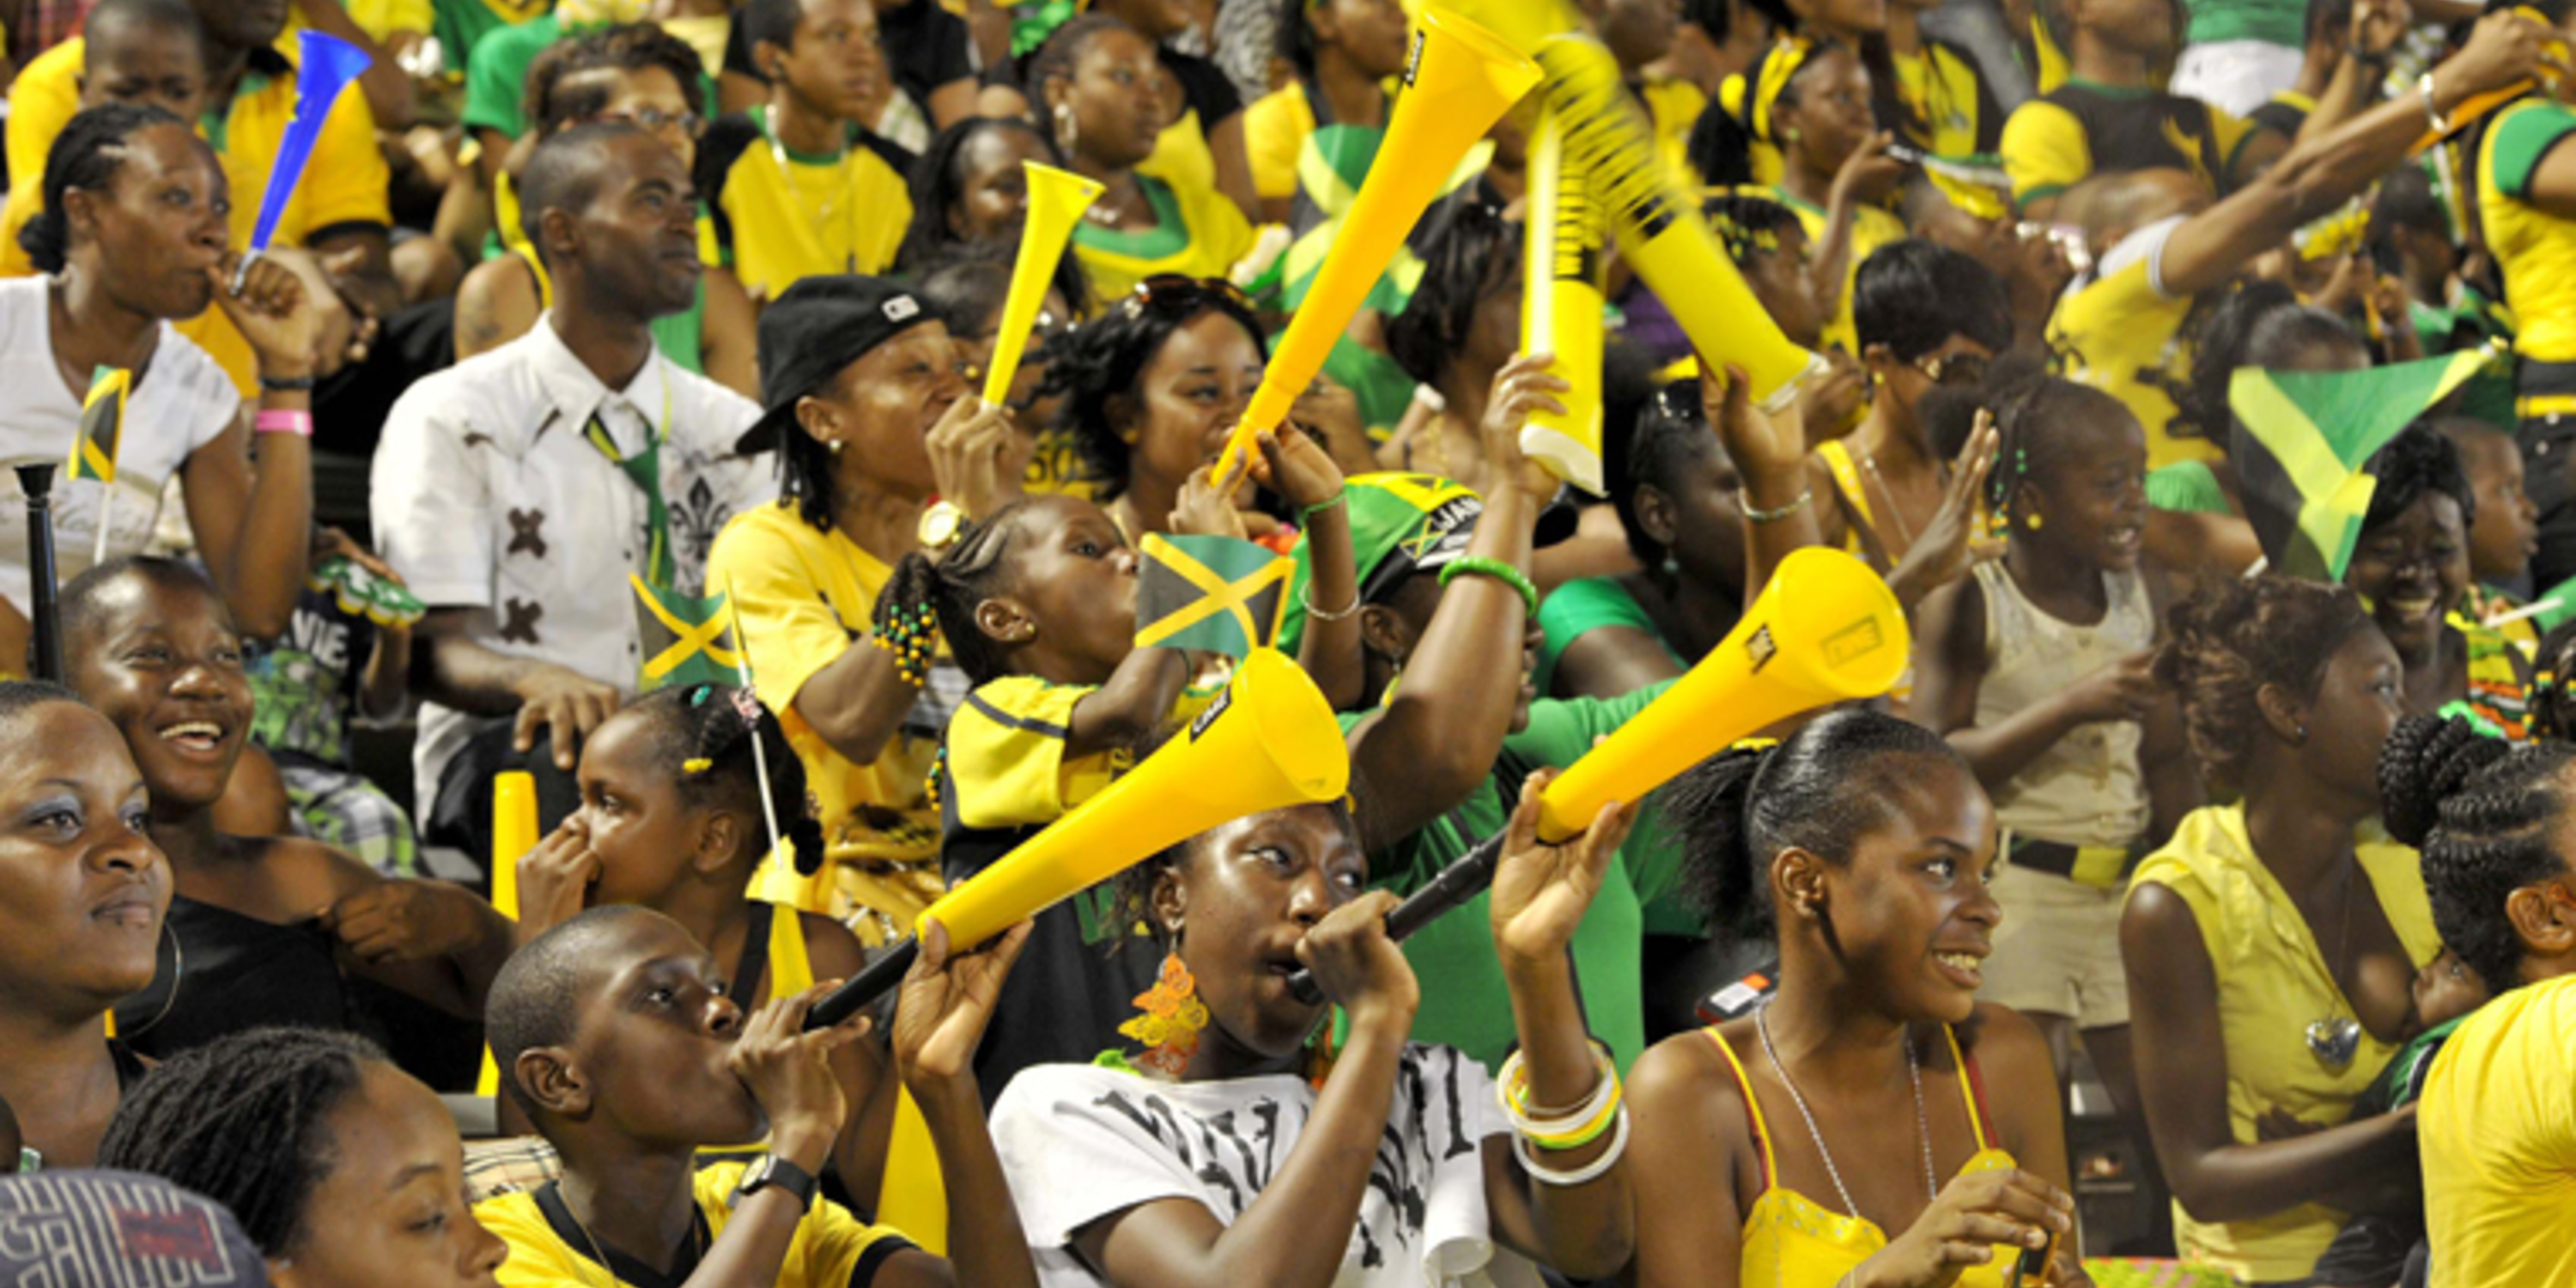 Celebrations for Jamaican Independence, 2012.